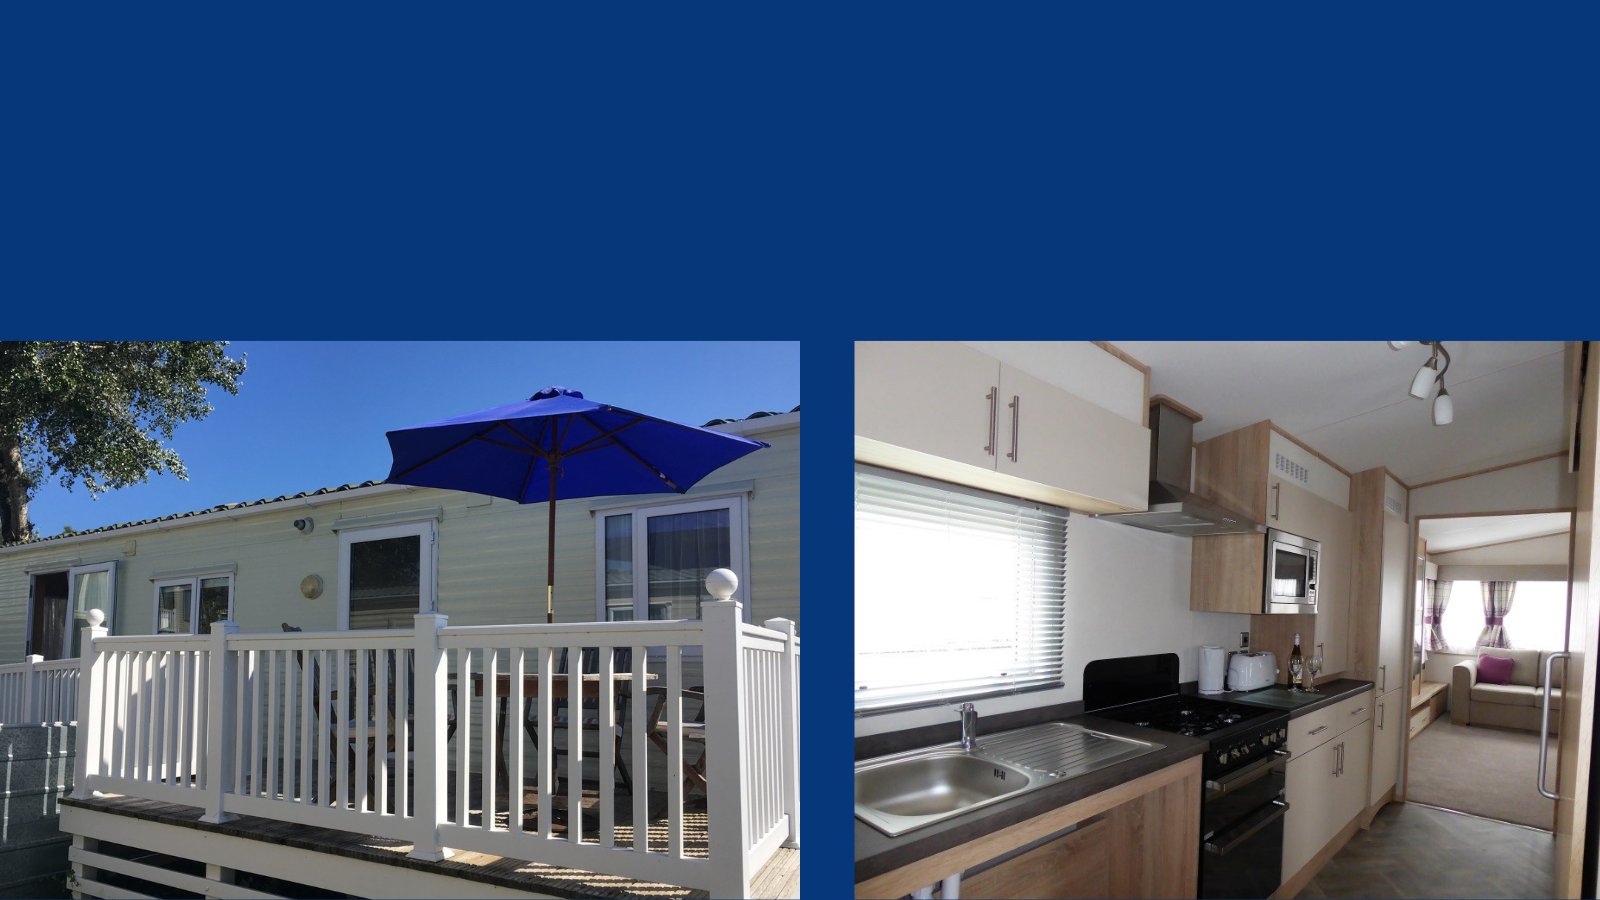 The left-hand image is of the outside of the Phab holiday home, which is a static caravan, it has a decking area and seats with a parasol. The right-hand image is of the kitchen area inside of the holiday home.